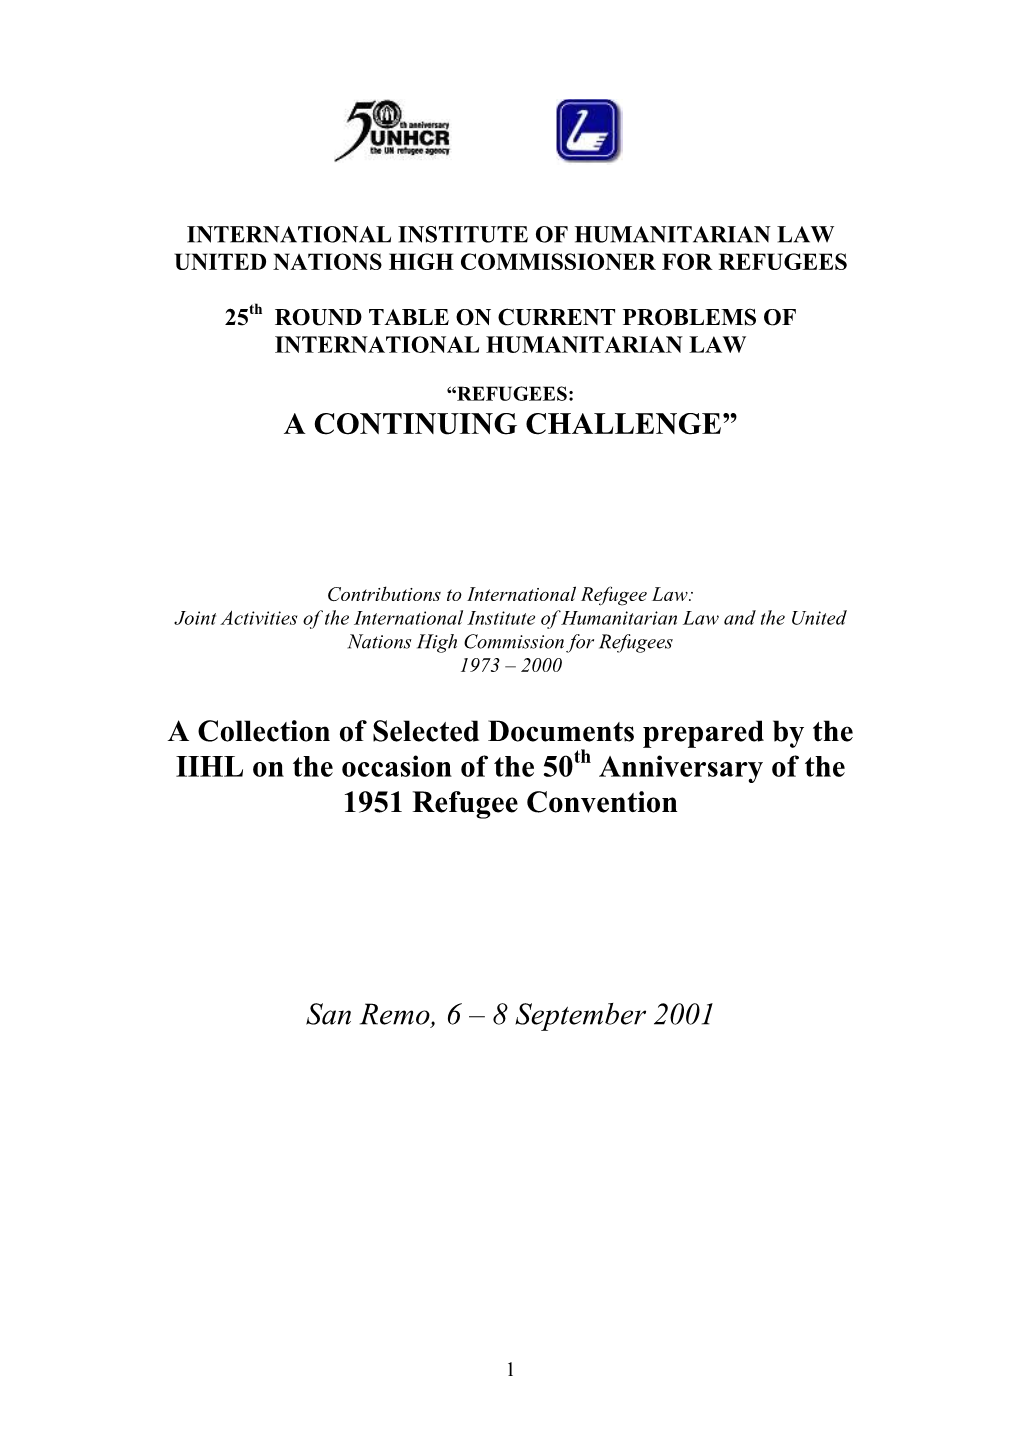 A CONTINUING CHALLENGE” a Collection of Selected Documents